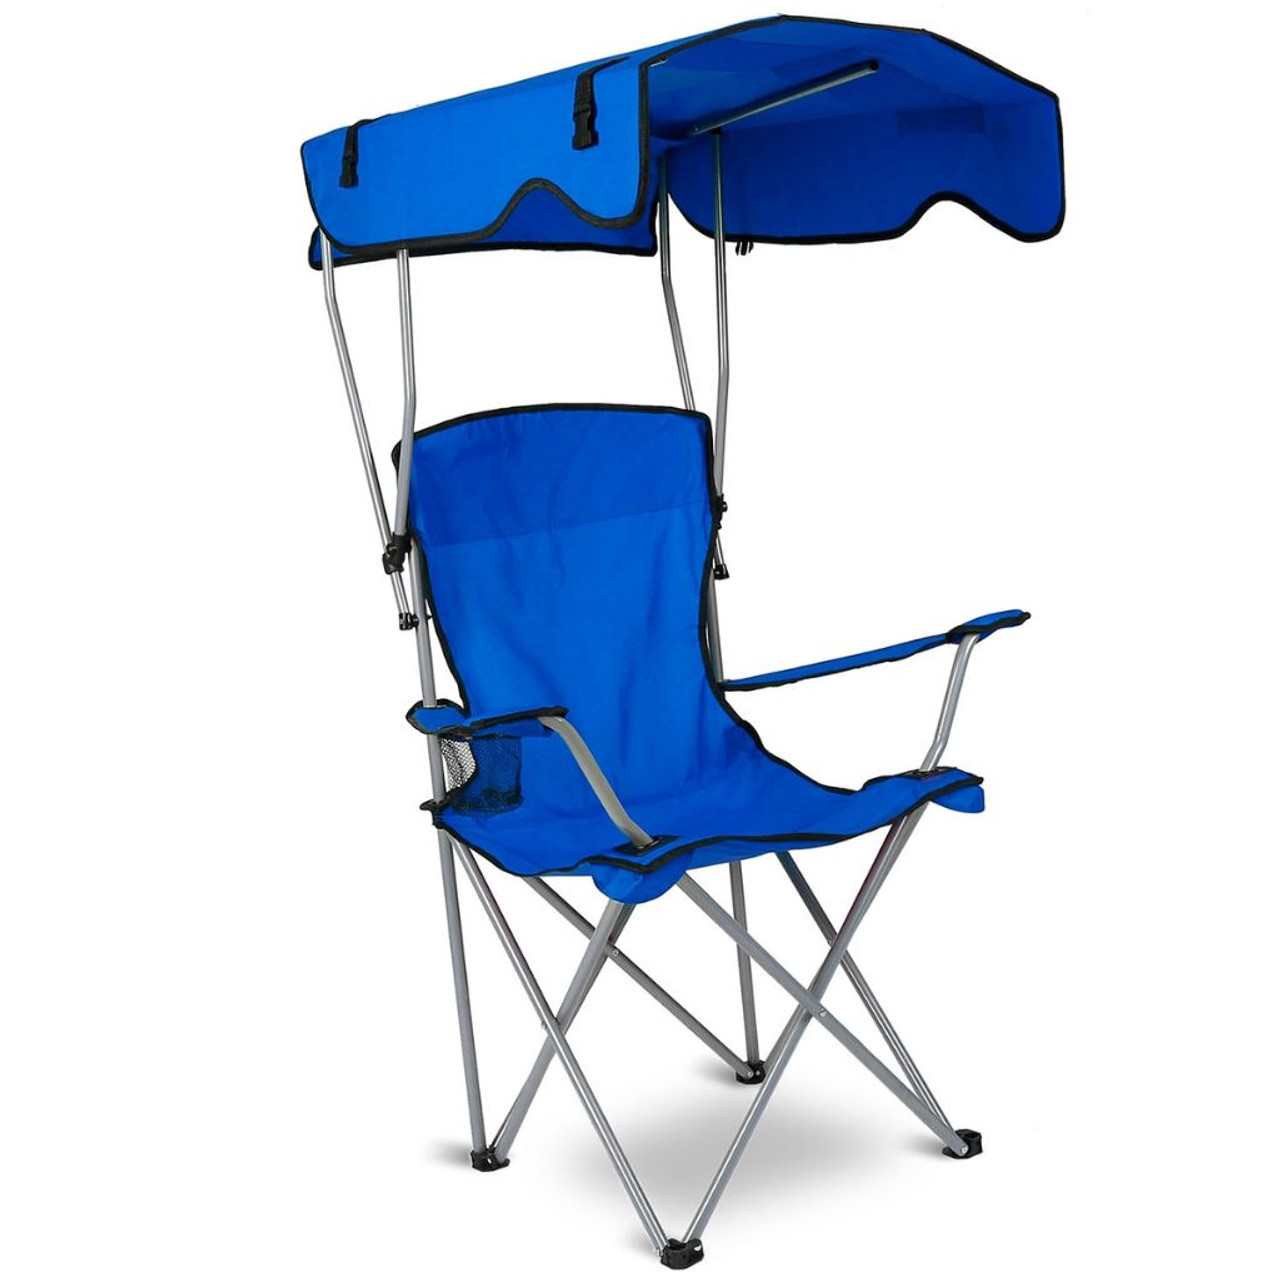  Foldable Beach Canopy Chair product image